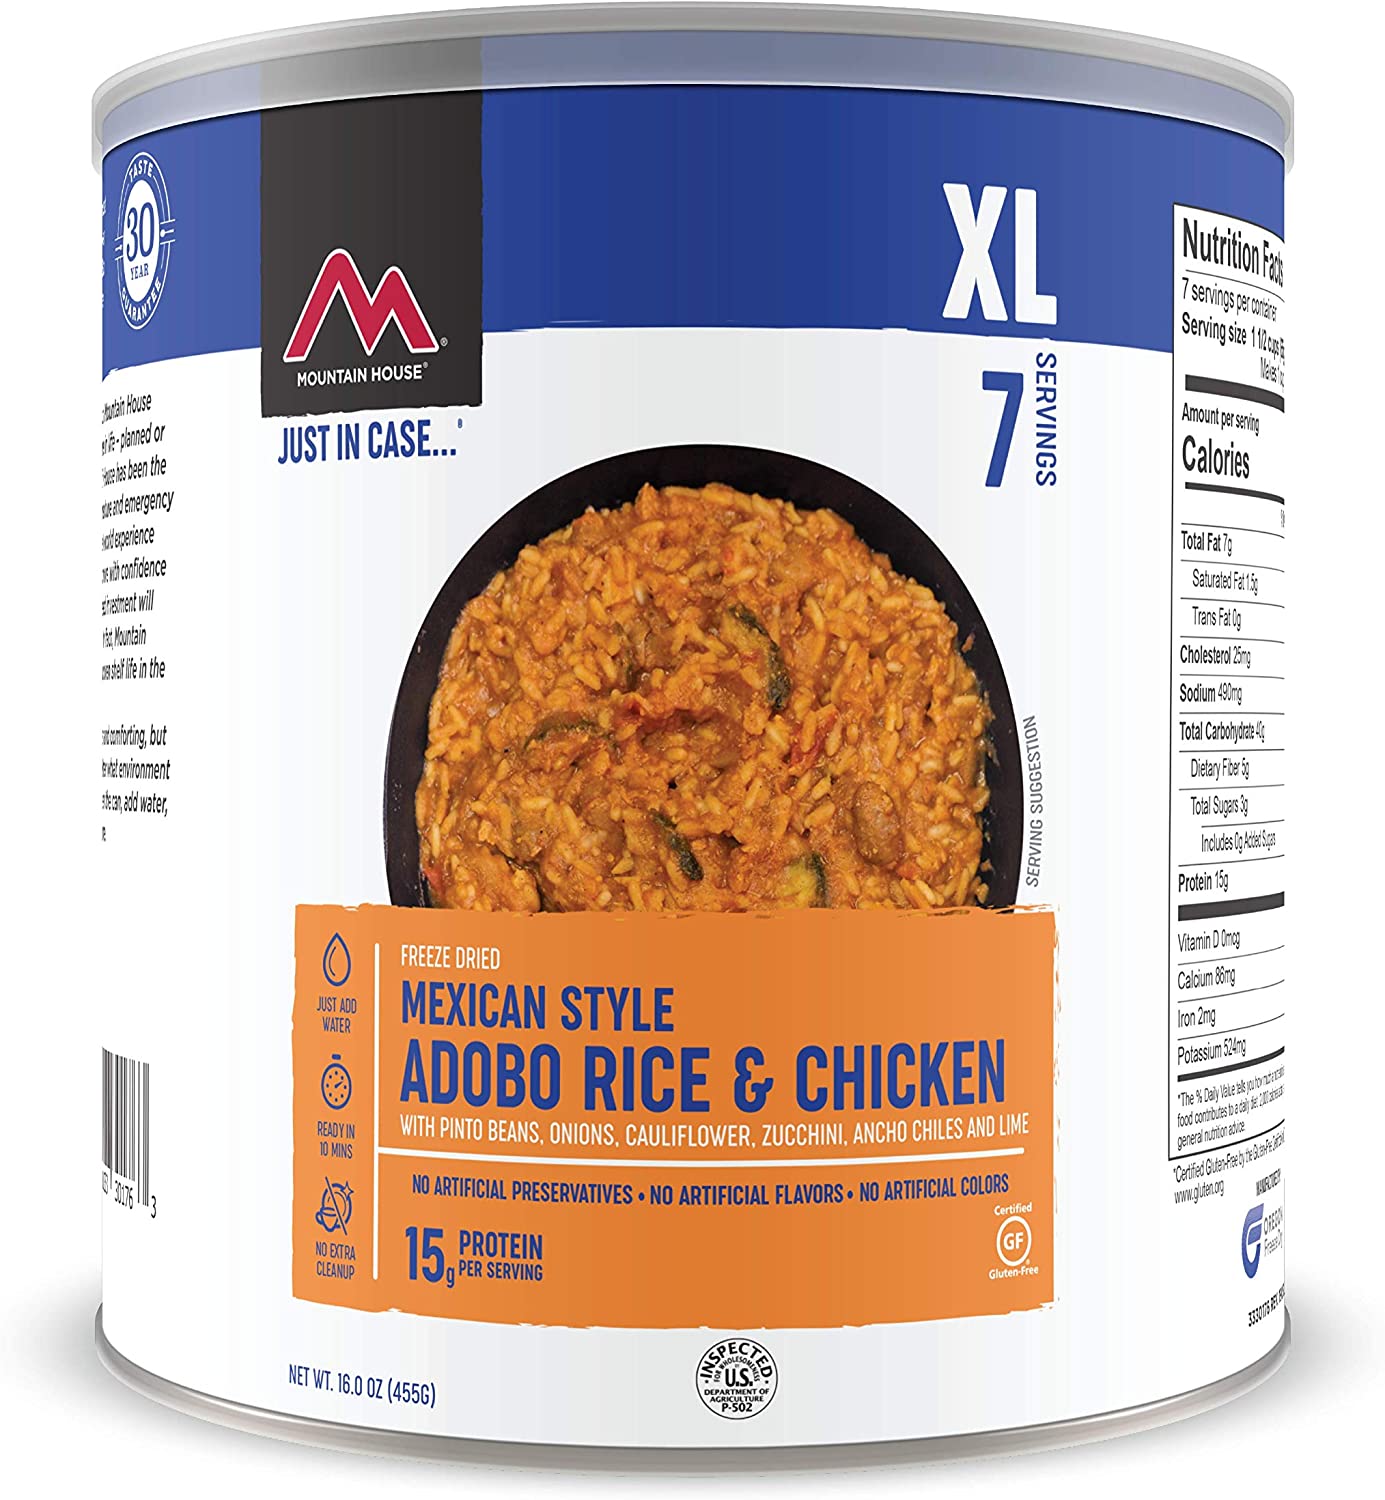 Mountain House Mexican Style Adobo Rice & Chicken | Freeze Dried Backpacking & Camping Food | Survival & Emergency Food | Gluten-Free